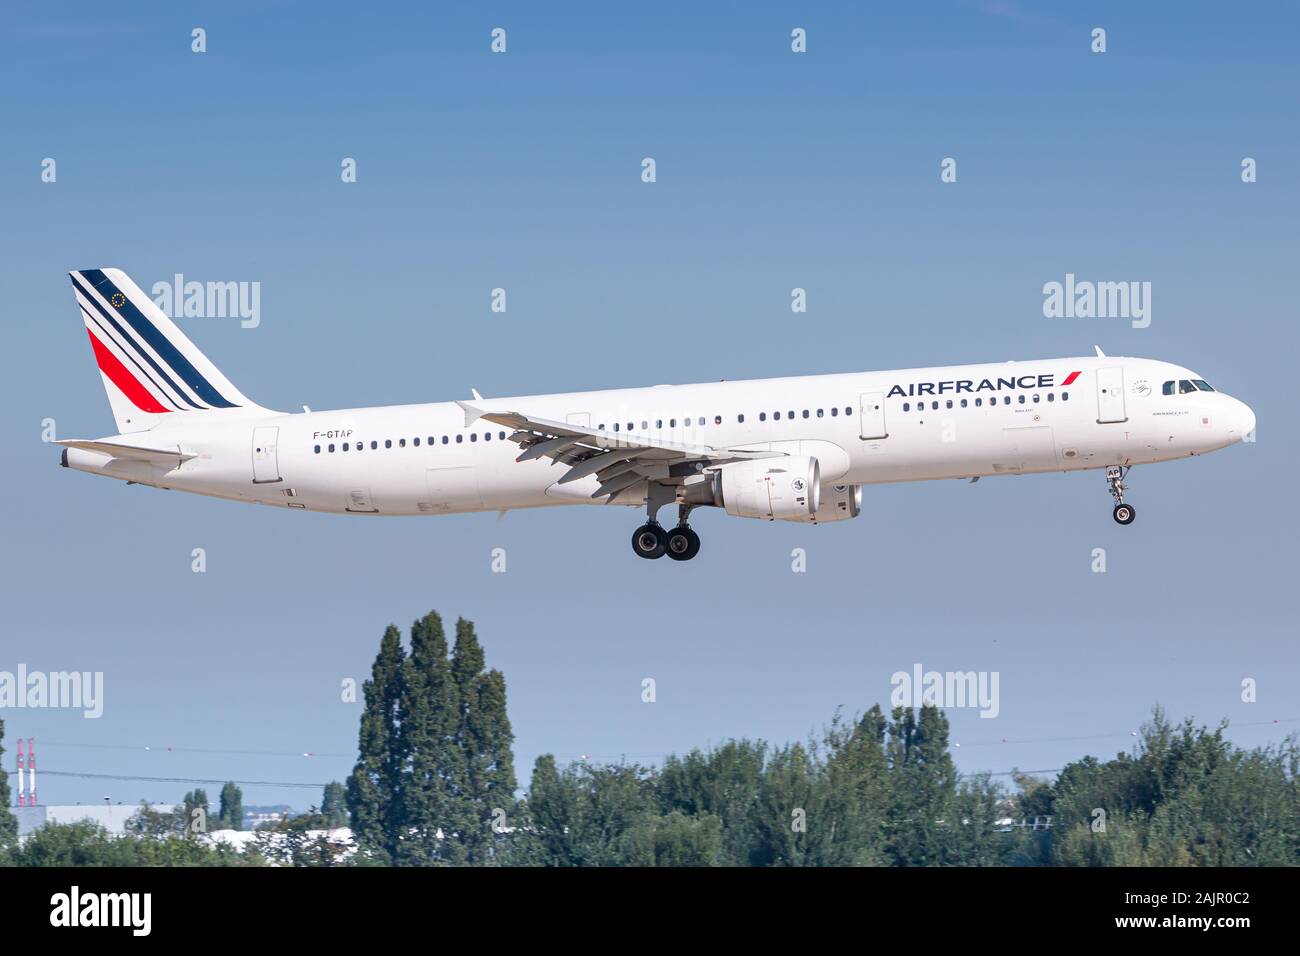 Paris, France - August 16, 2018: Air France Airbus A321 airplane at Paris Orly airport (ORY) in France. Airbus is an aircraft manufacturer from Toulou Stock Photo